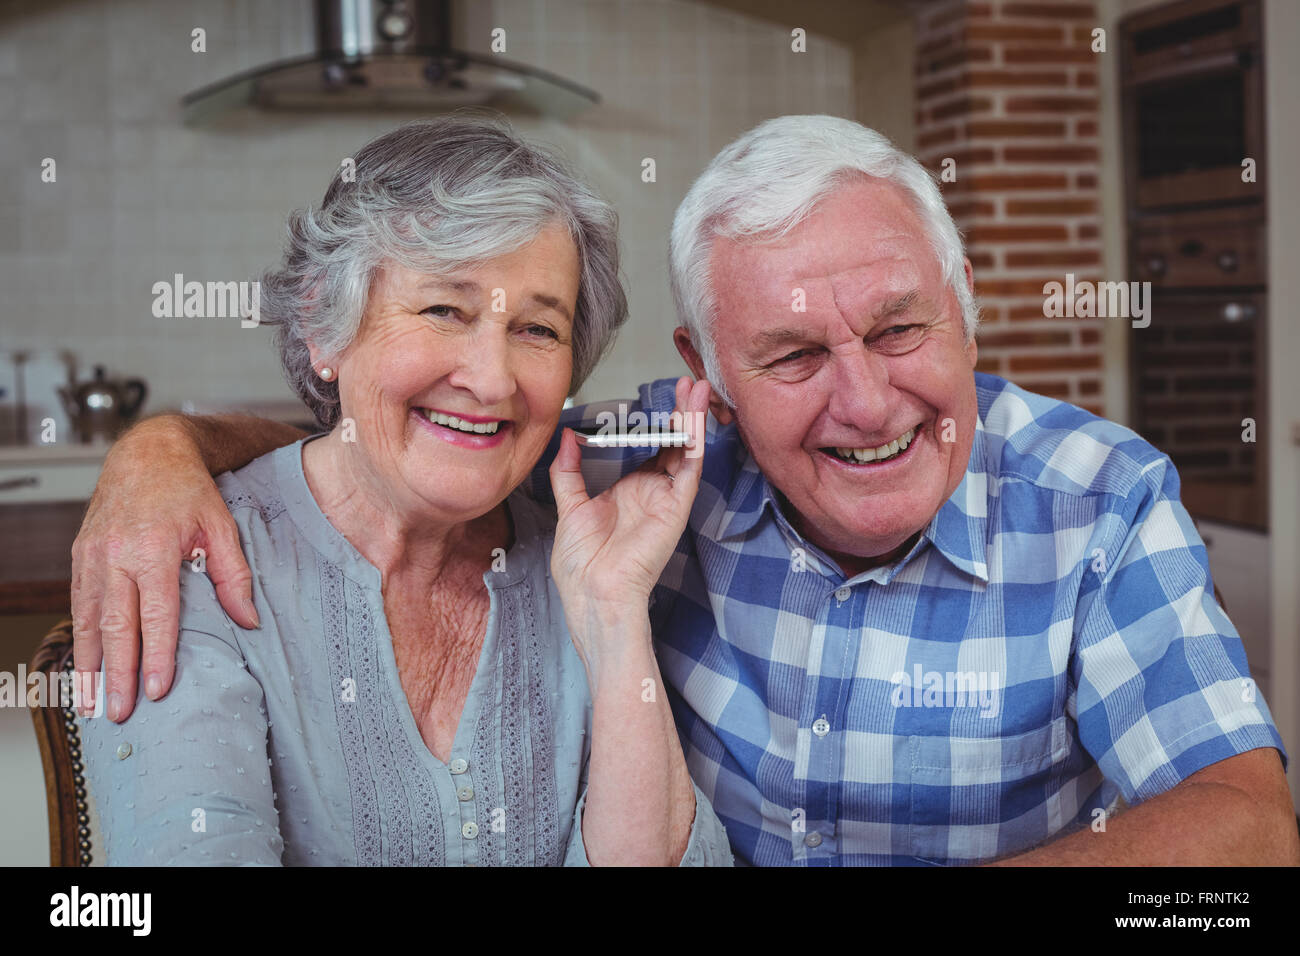 Senior couple listening music in kitchen Banque D'Images